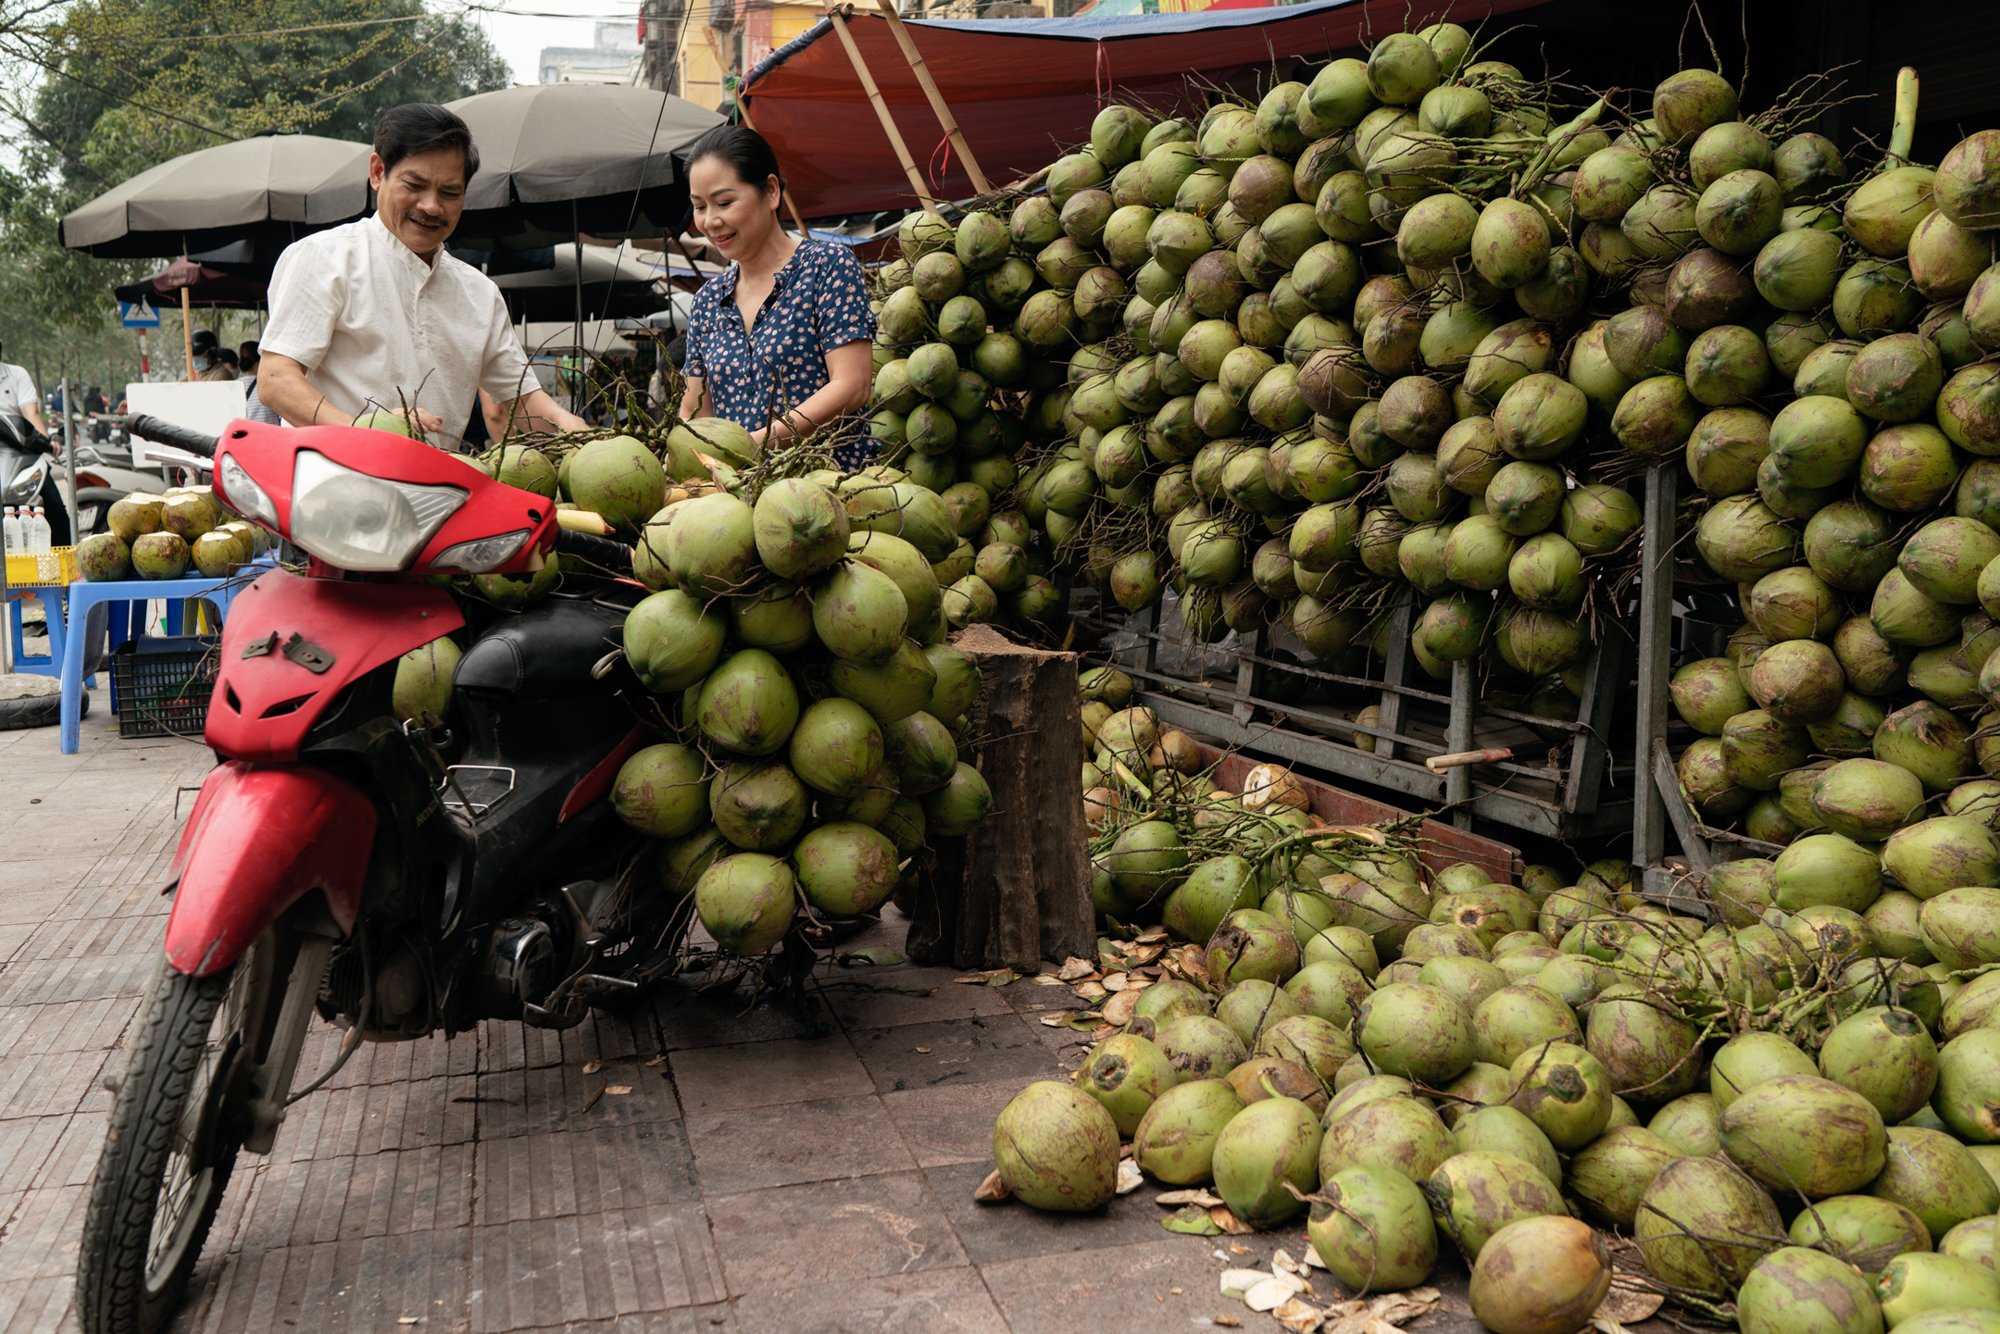  Buyer and market seller stack a large quantity of cocunuts onto motorbike at wholsale market. 